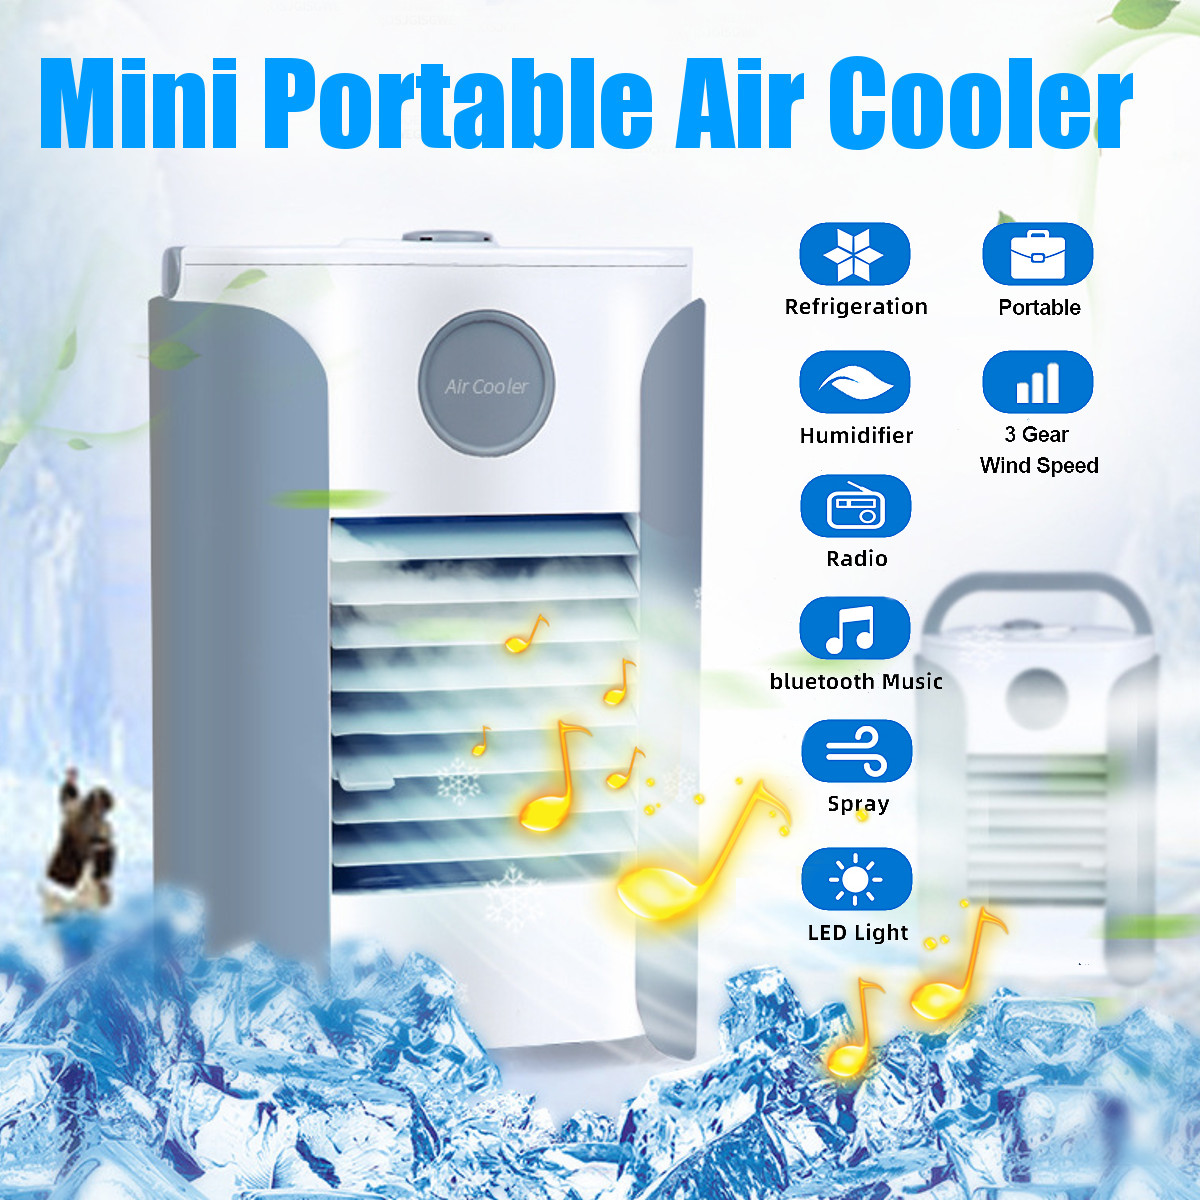 USB-Mini-Portable-Bluetooth-Radio-Air-Cooler-Humidifier-Conditioning-Mute-Spray-Cooling-Fan-1690137-1